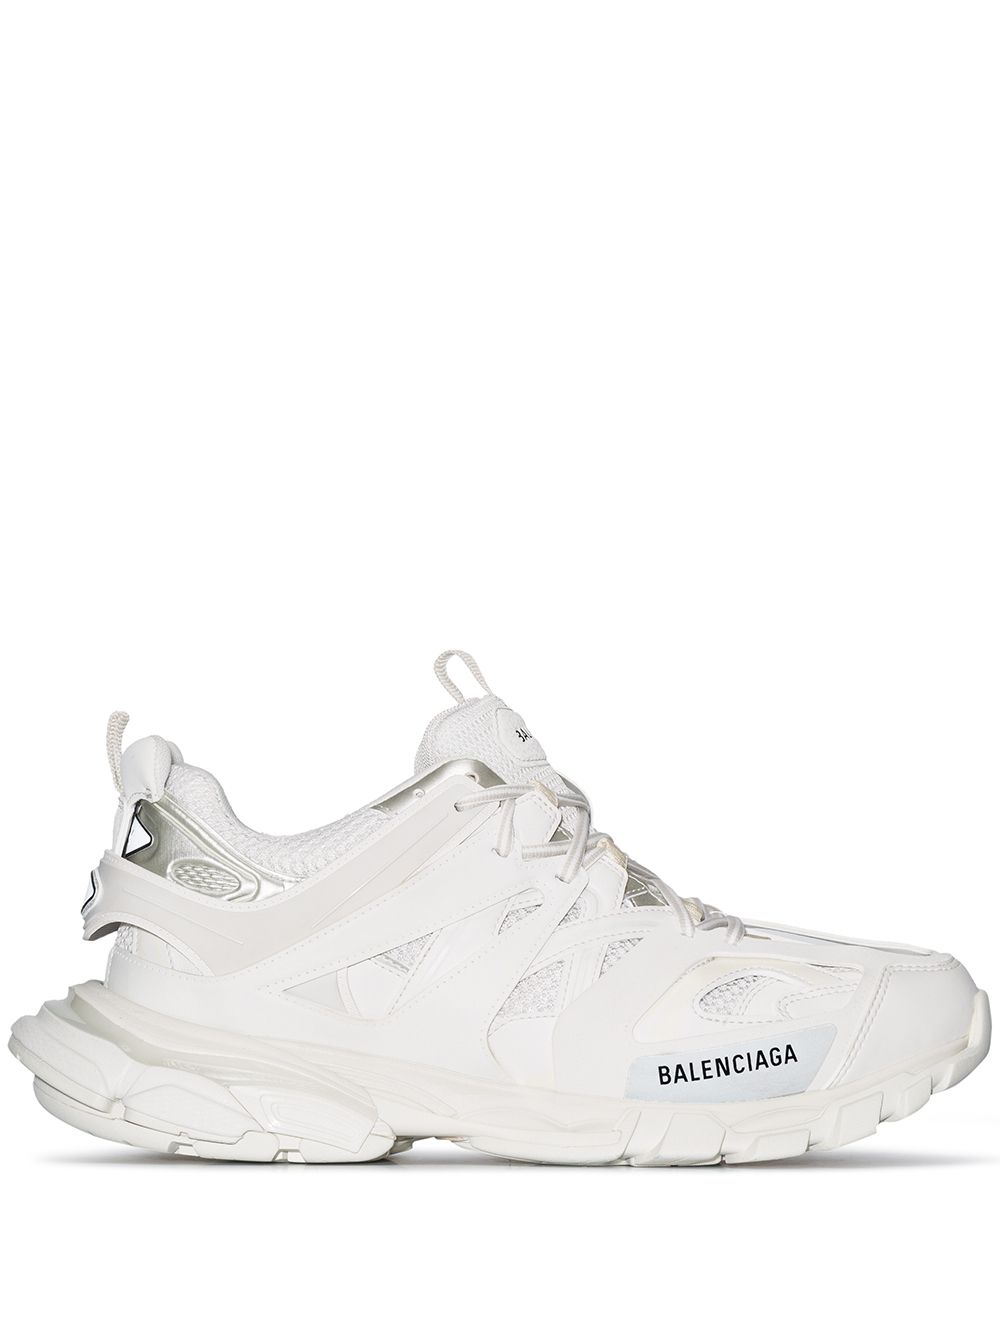 BALENCIAGA Fashion Forward White Sneakers for Men with Chunky Rubber Sole